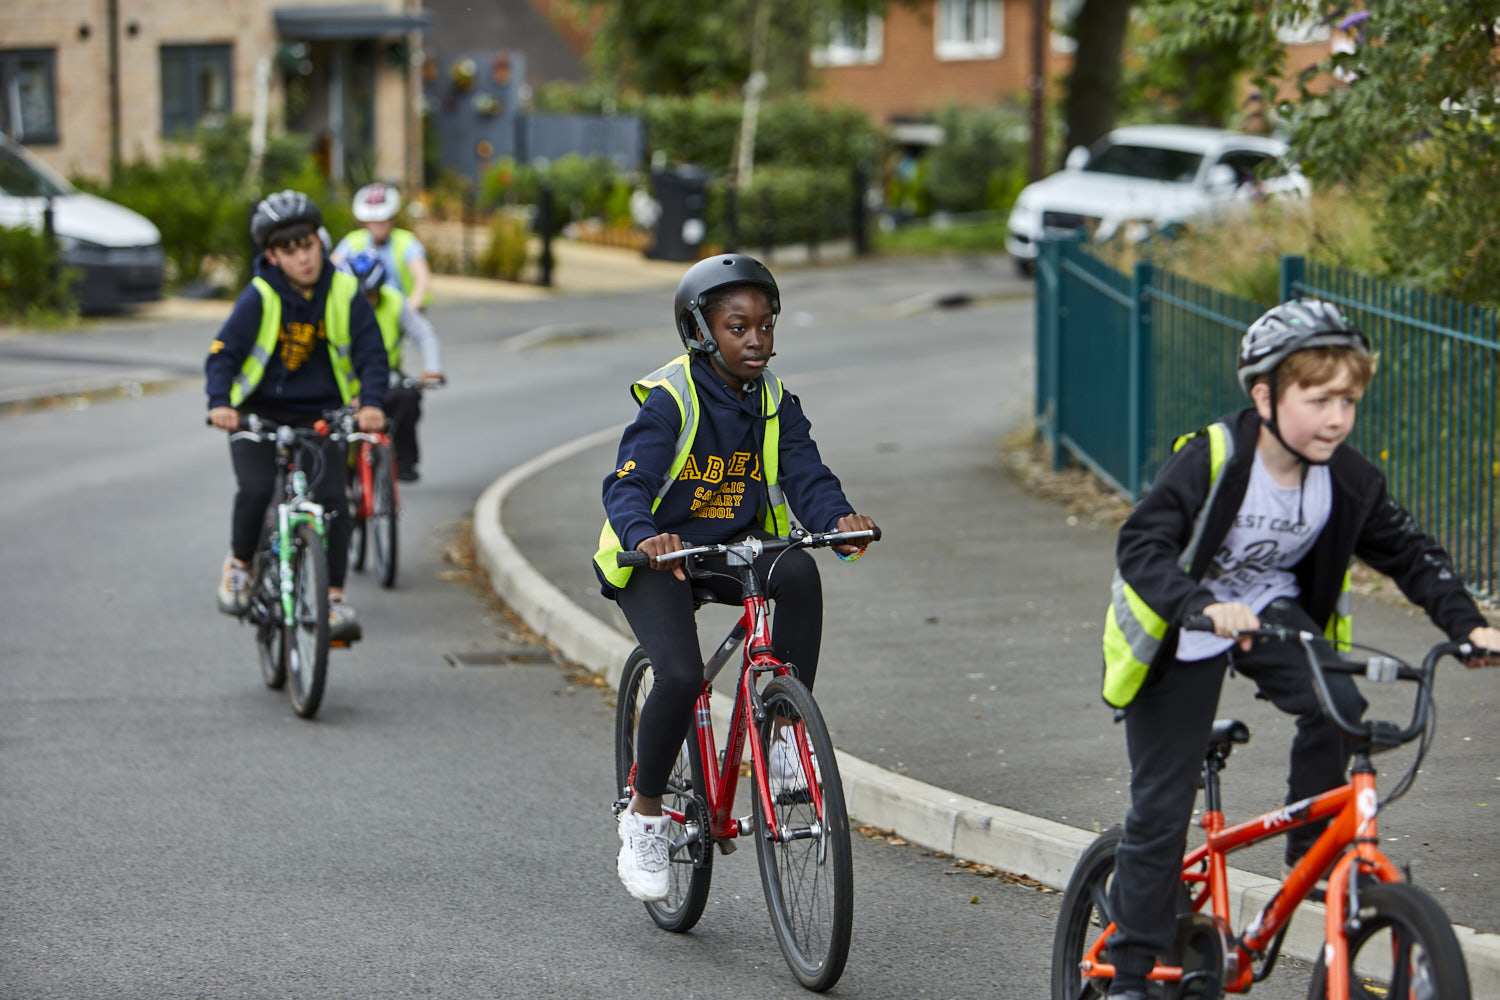 A group of children cycle round the corner of a road, they are wearing high vis vests and cycle helmets and are riding in single file.